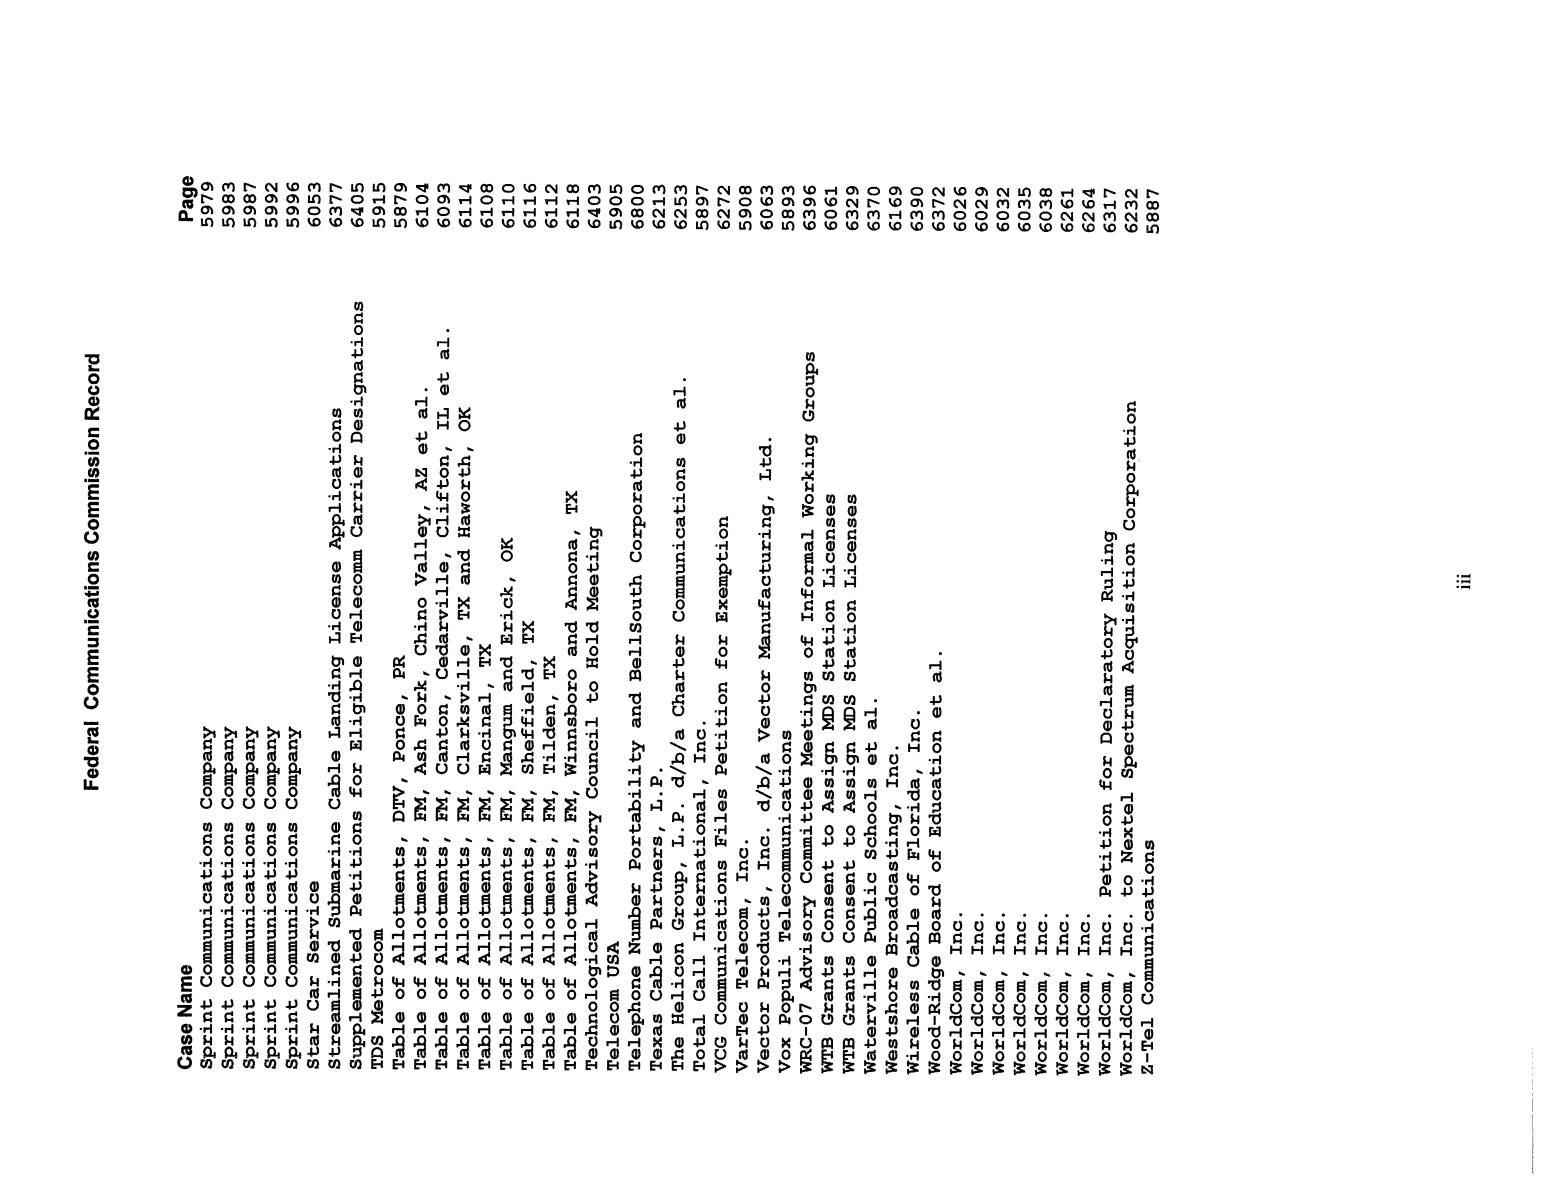 FCC Record, Volume 19, No. 8, Pages 5879 to 6813, March 31 - April 13, 2004
                                                
                                                    III
                                                